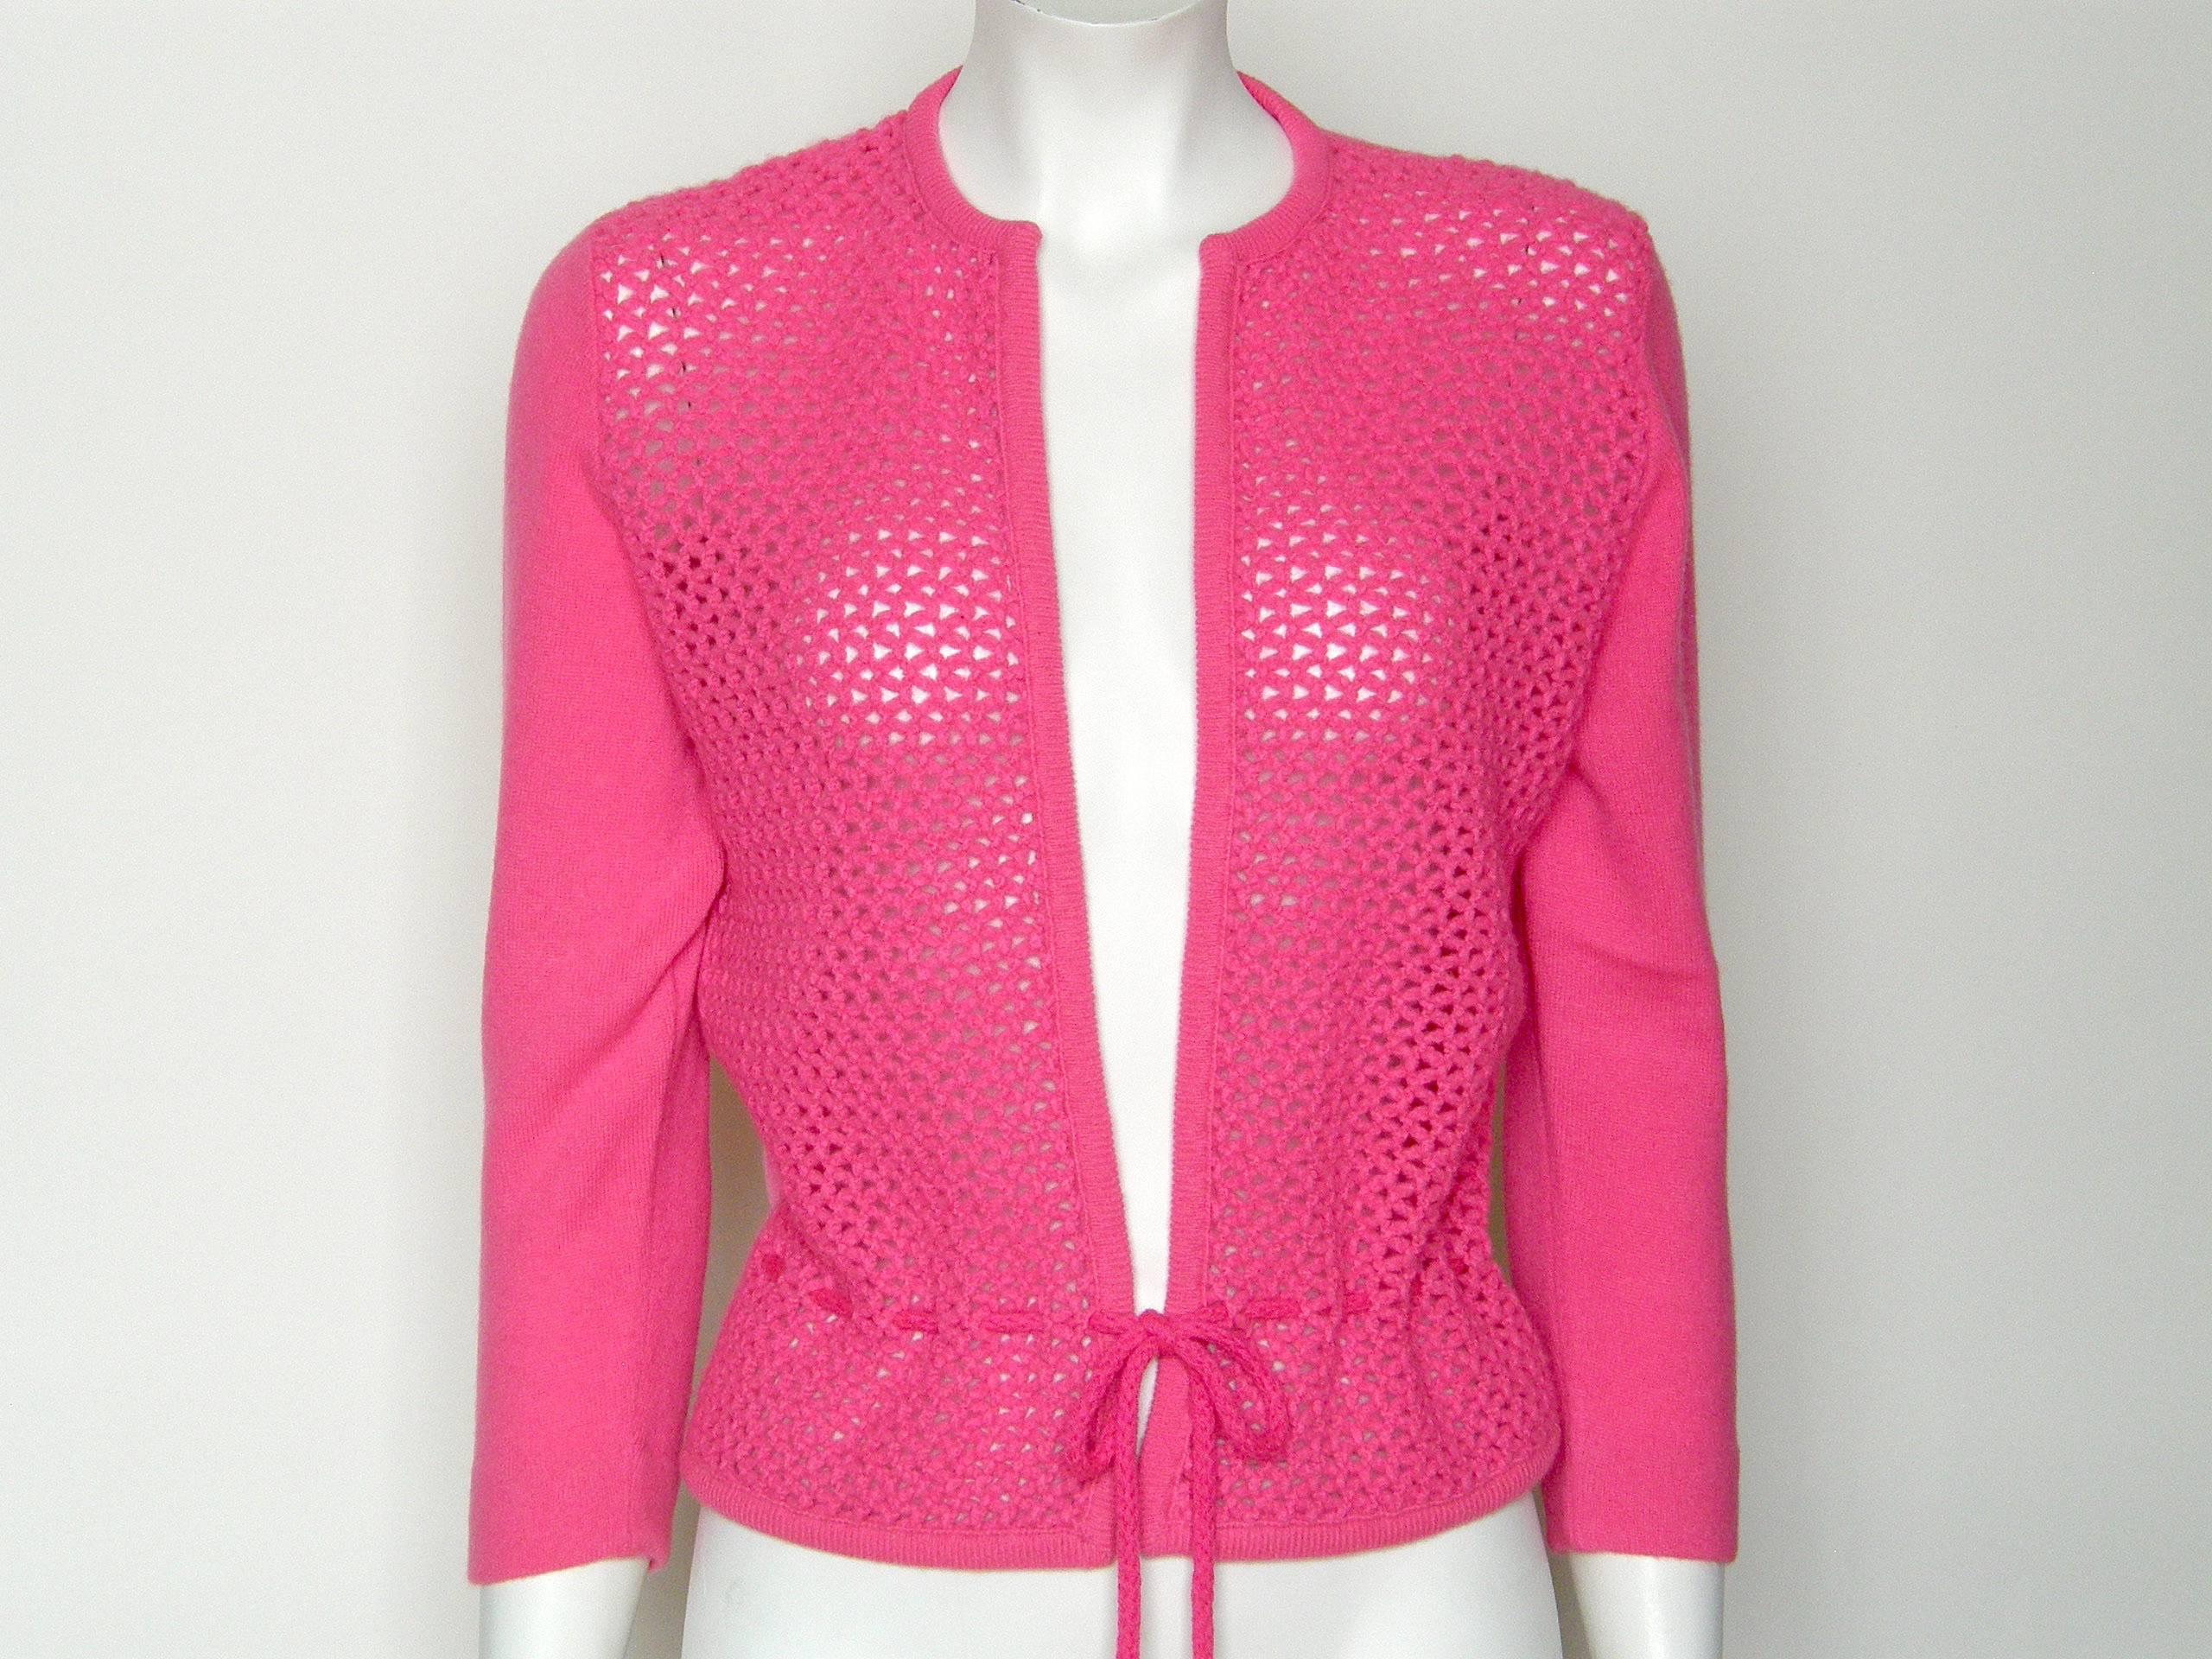 This vibrant pink cardigan has an unusual fishnet pattern on the front that highlights and flatters your curves. The braided tie laces through the openings in the net. As shown, the tie is hidden in back, but it can also be laced so that it goes